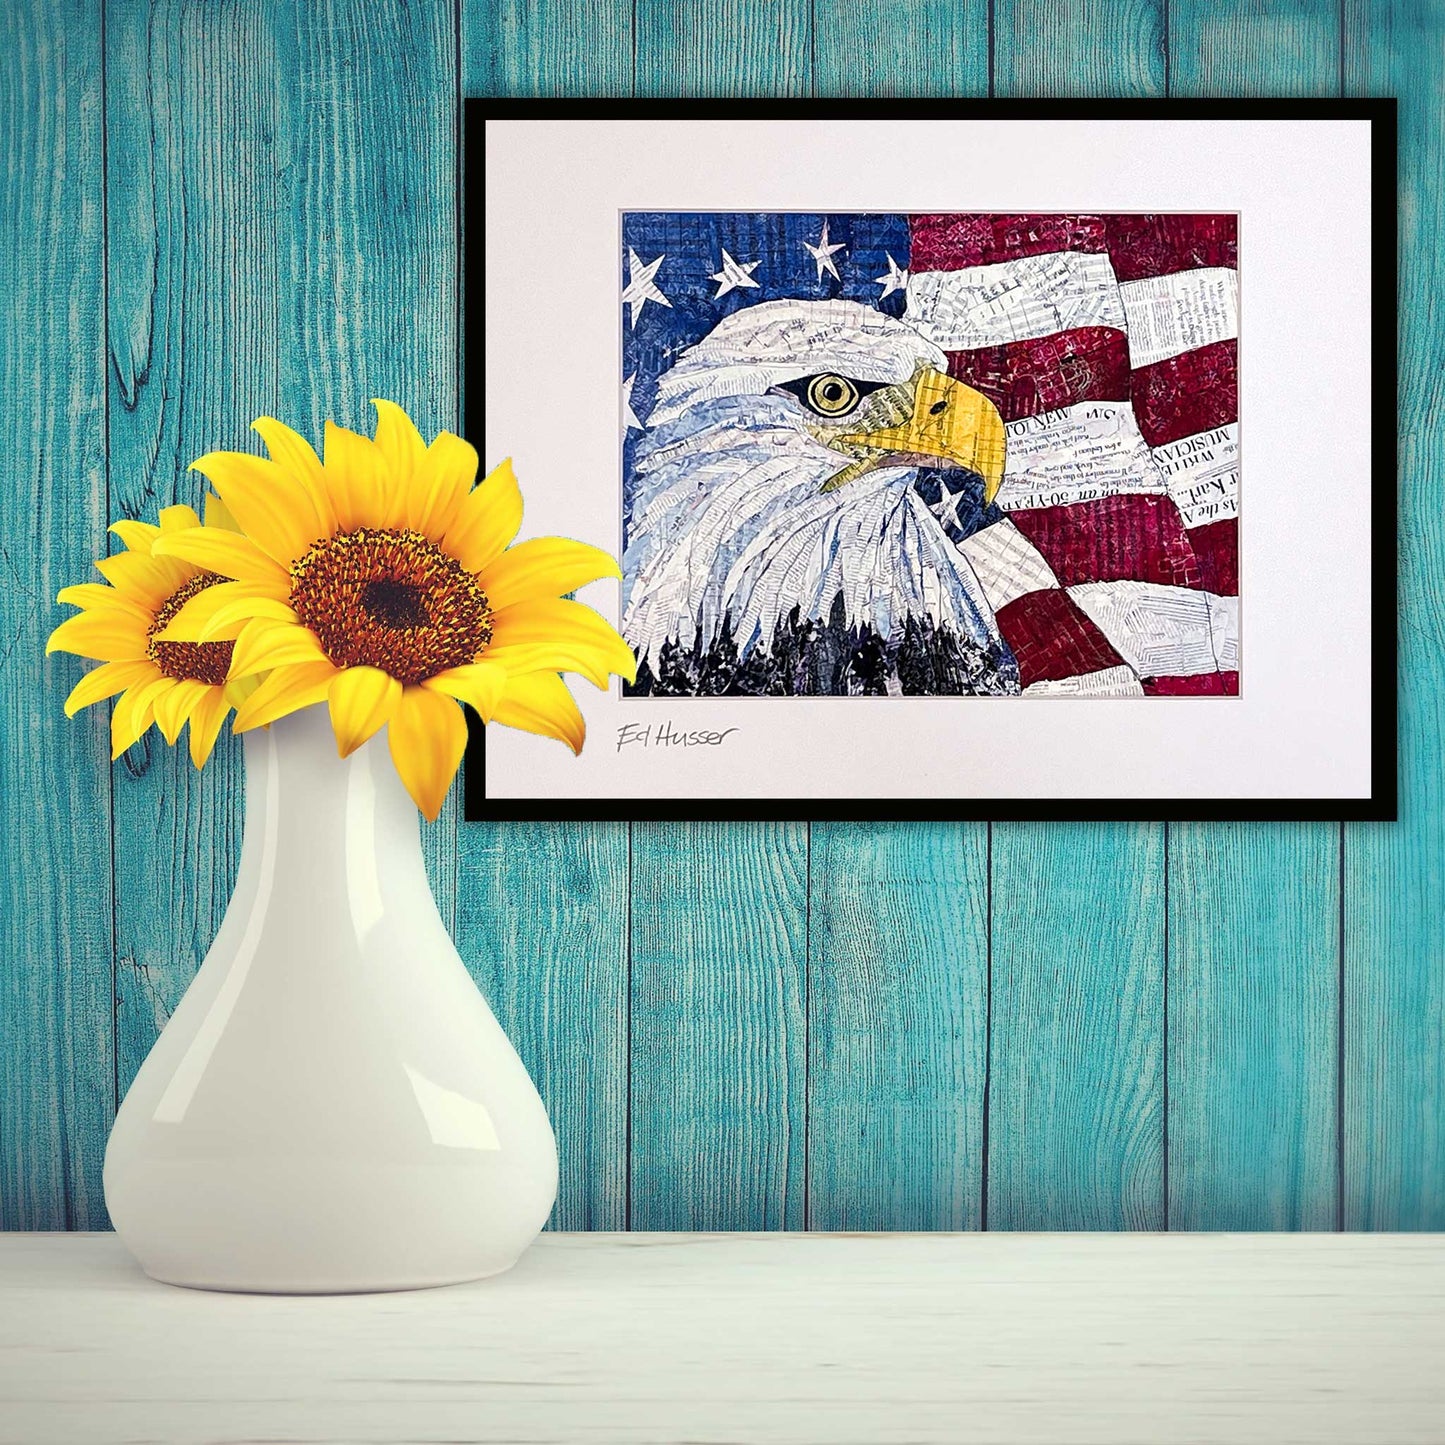 EMH America's Pride Print, Signed Matted Print